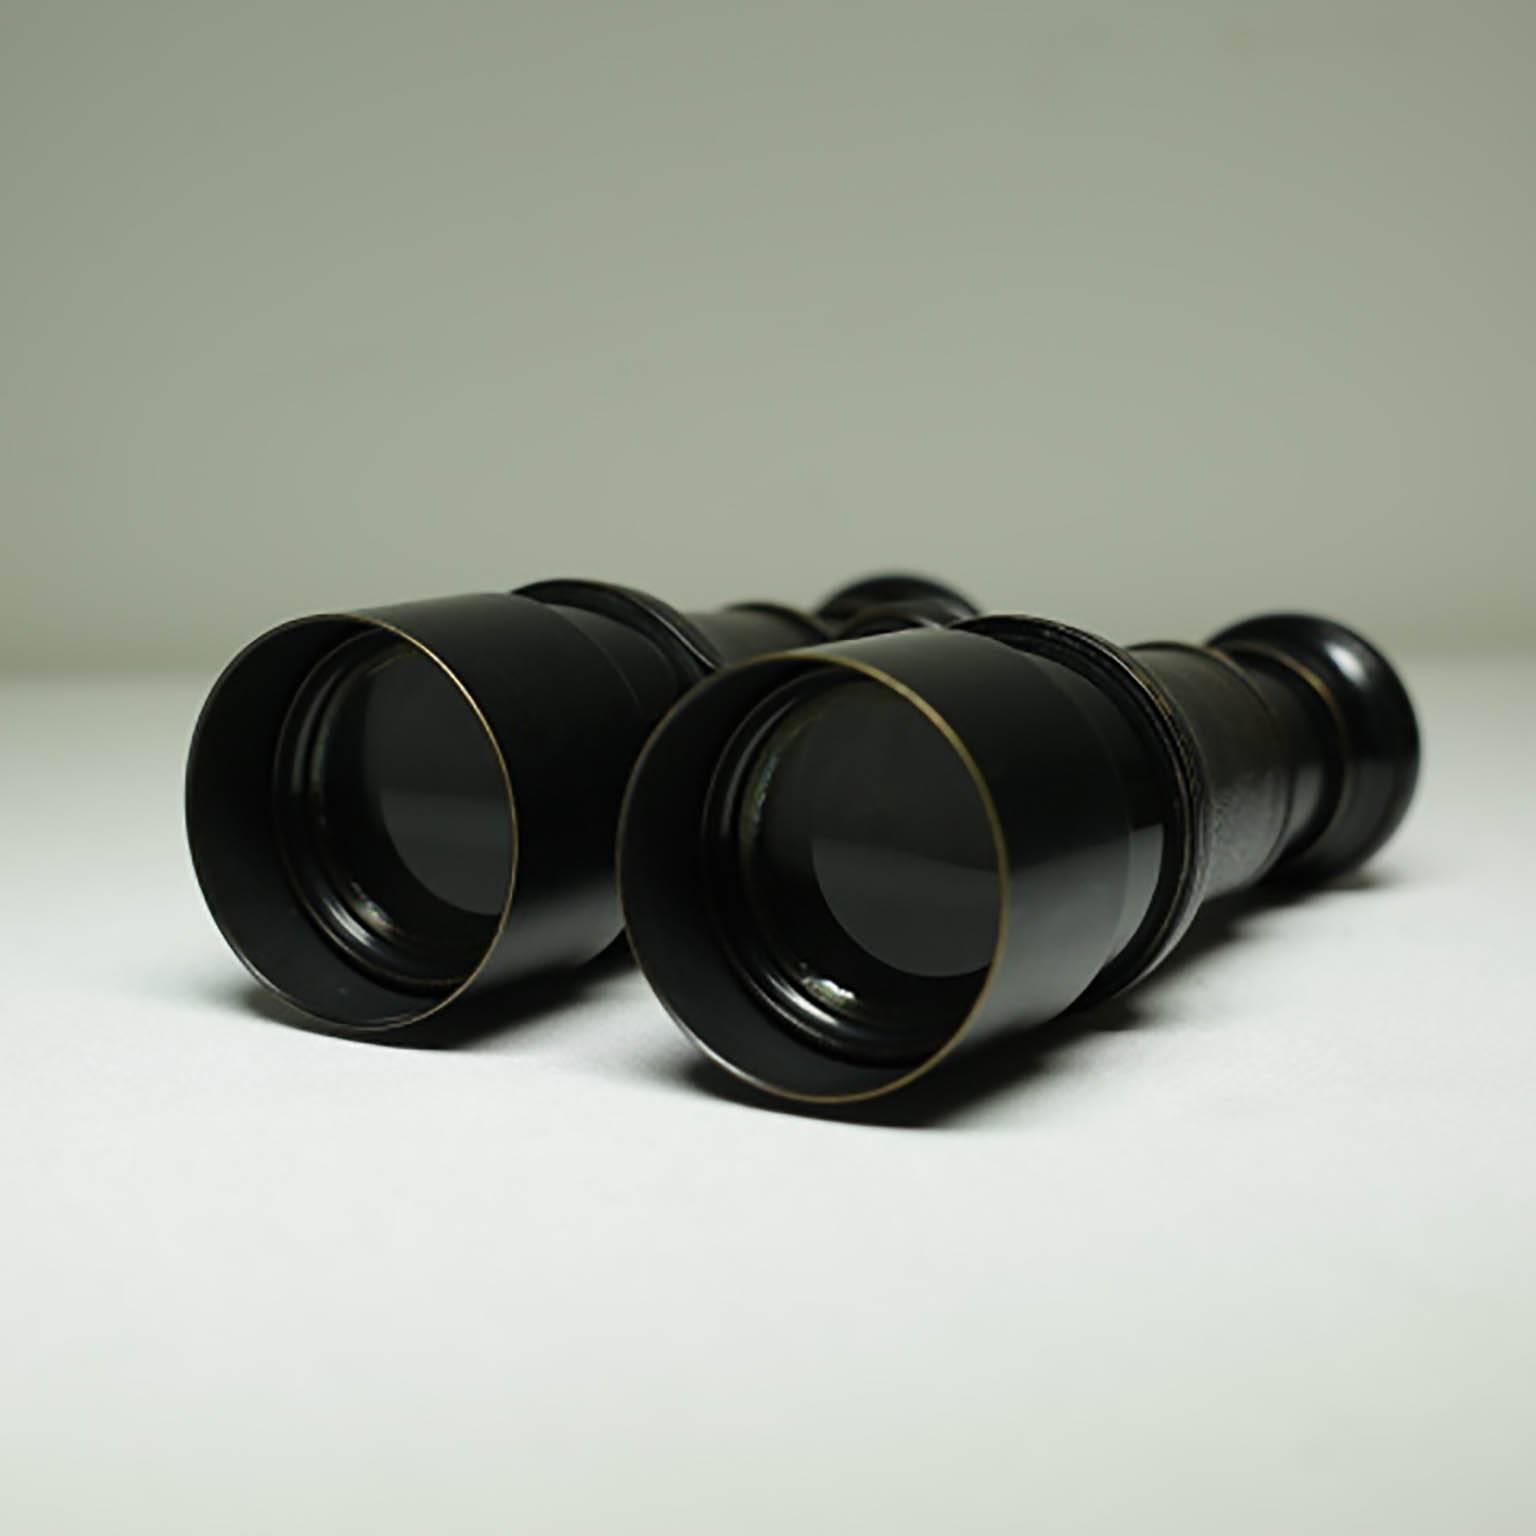 Leather wrapped brass binoculars with telescoping lens to prevent glare. Stamped 